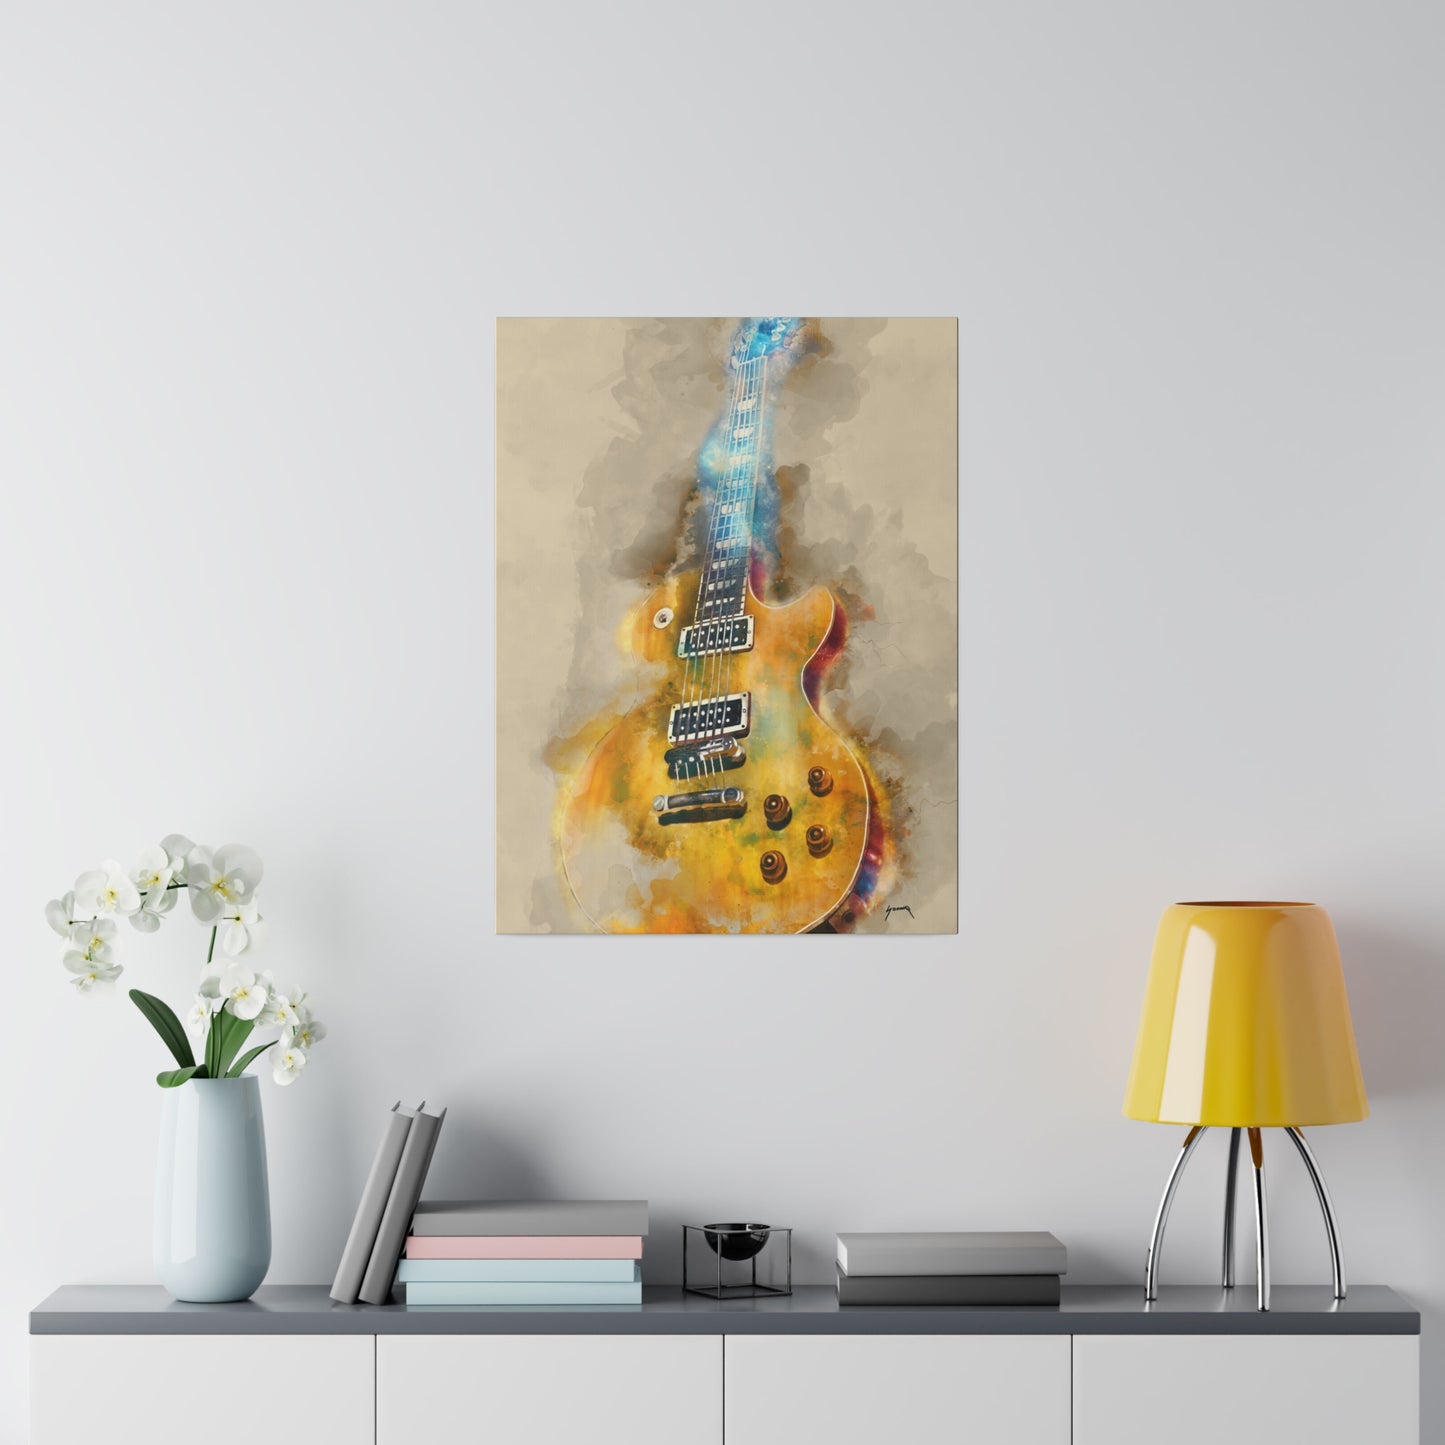 Digital painting of an electric guitar printed on canvas